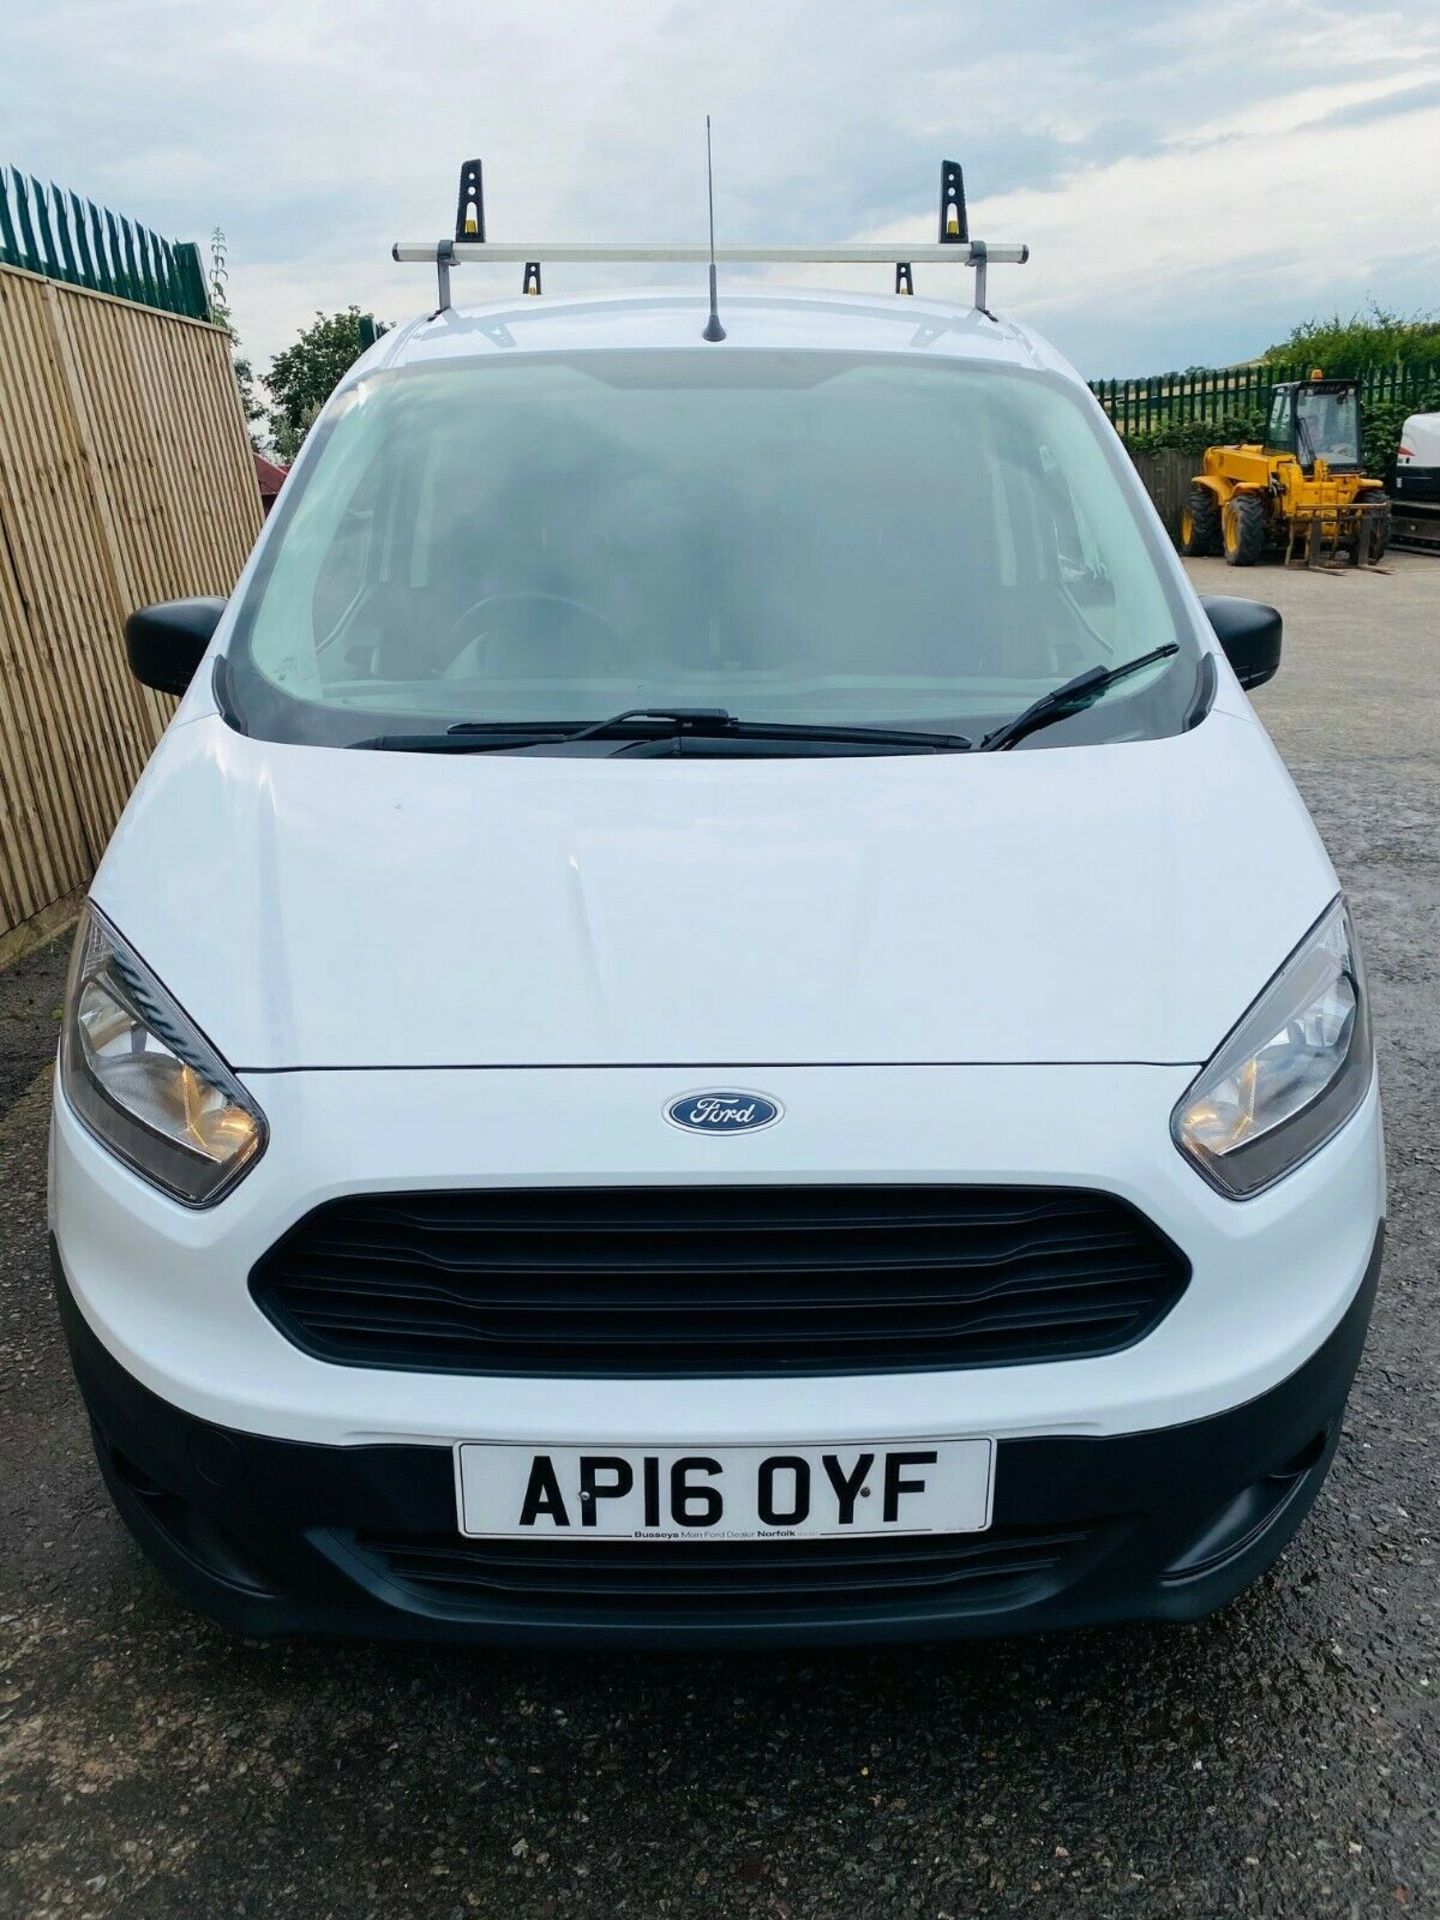 Ford Transit Courier 1.5 TDCI - Image 2 of 12